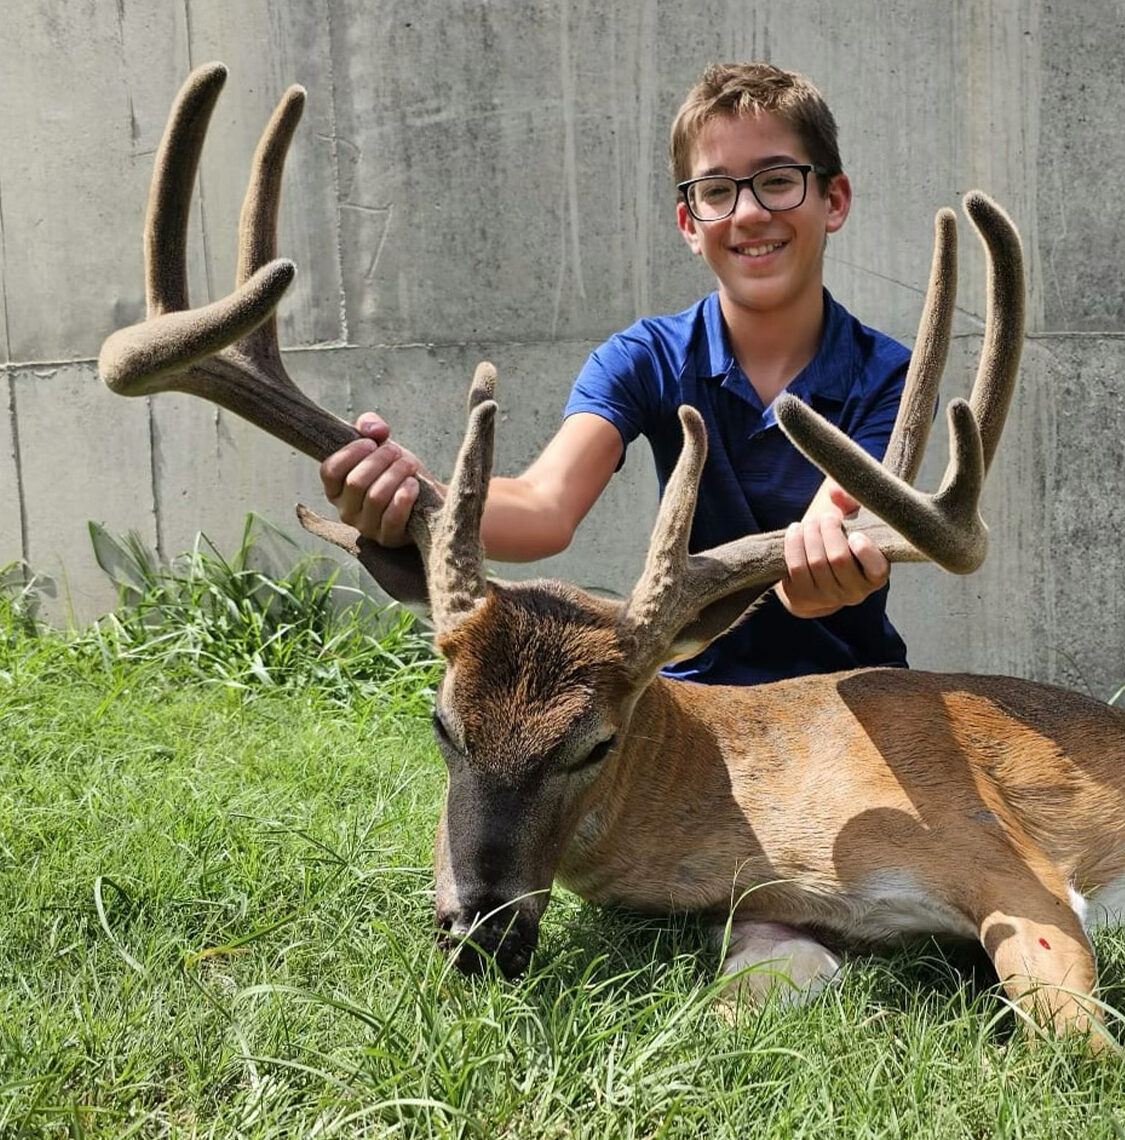 A 10-year-old kid with glasses holding the antlers of a big typical velvet buck.